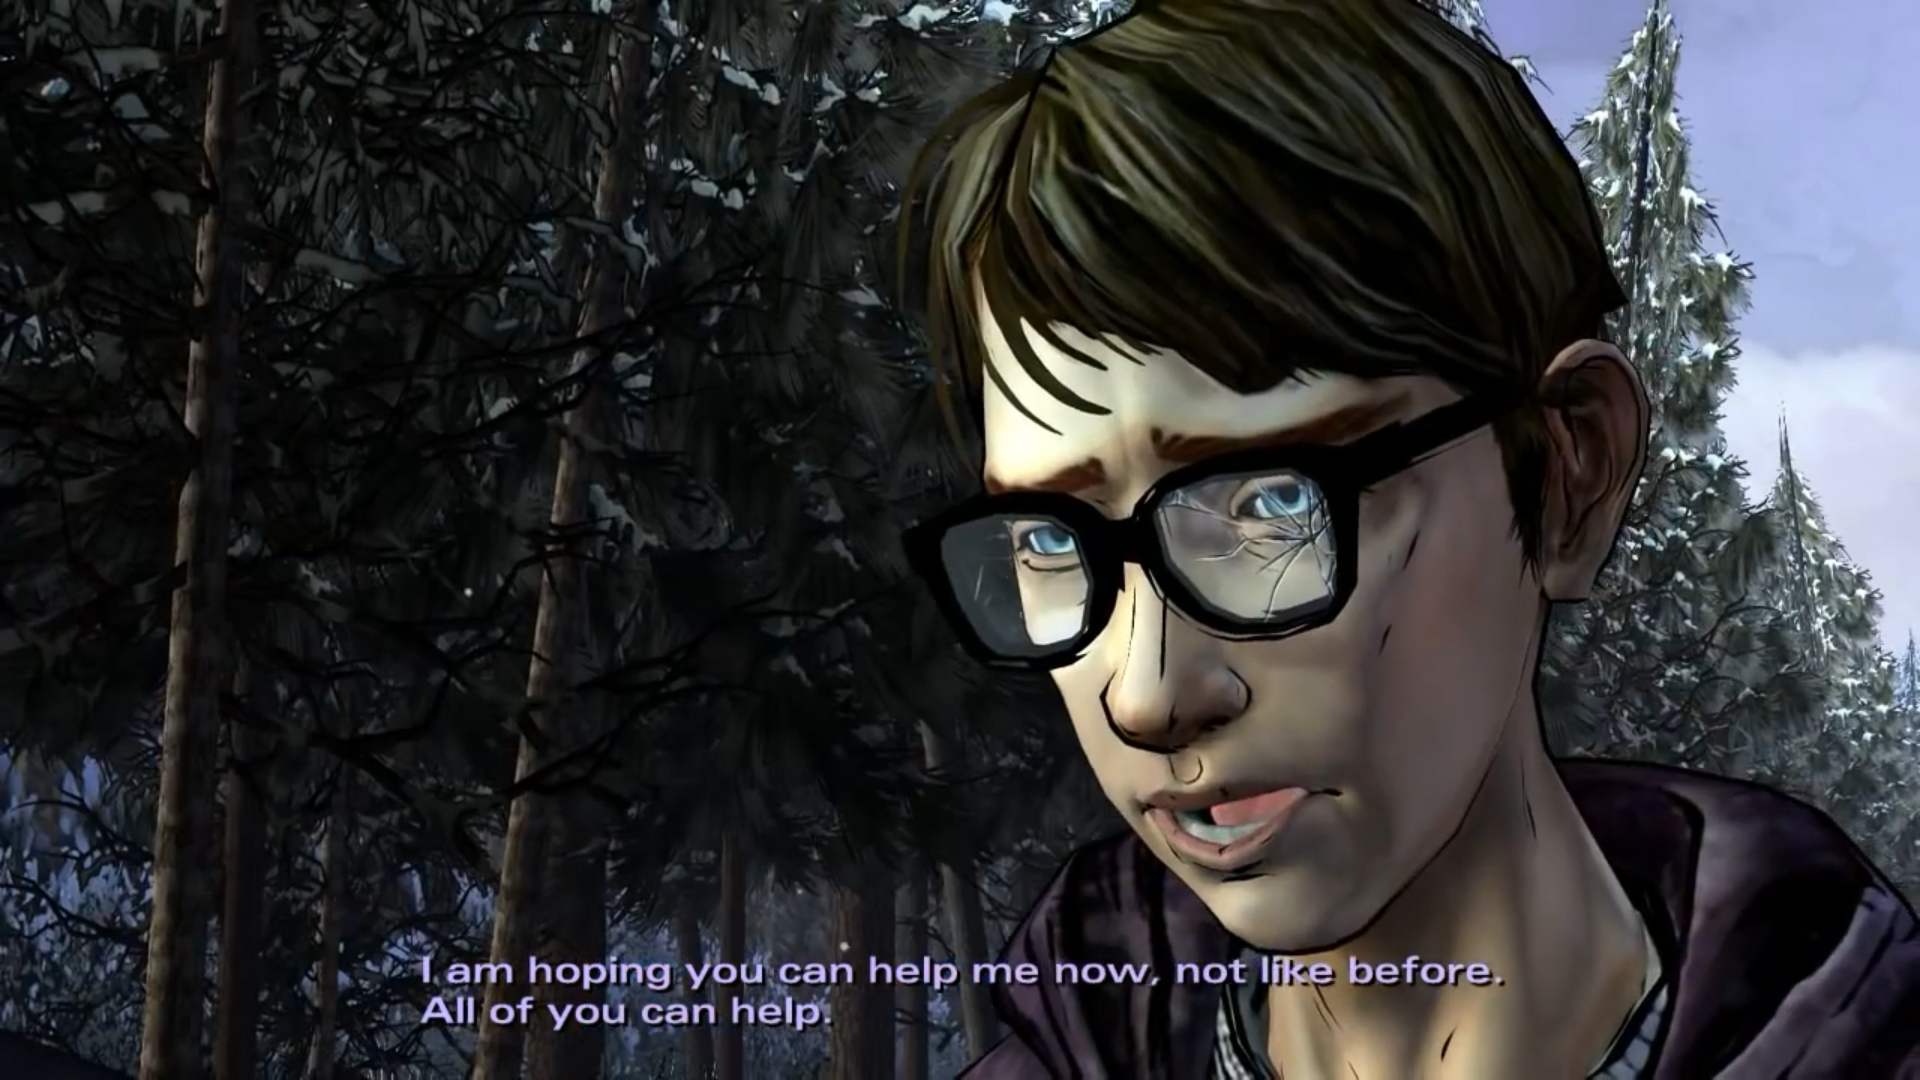 Michael Ark as the voice of Arvo in The Walking Dead game by TellTale